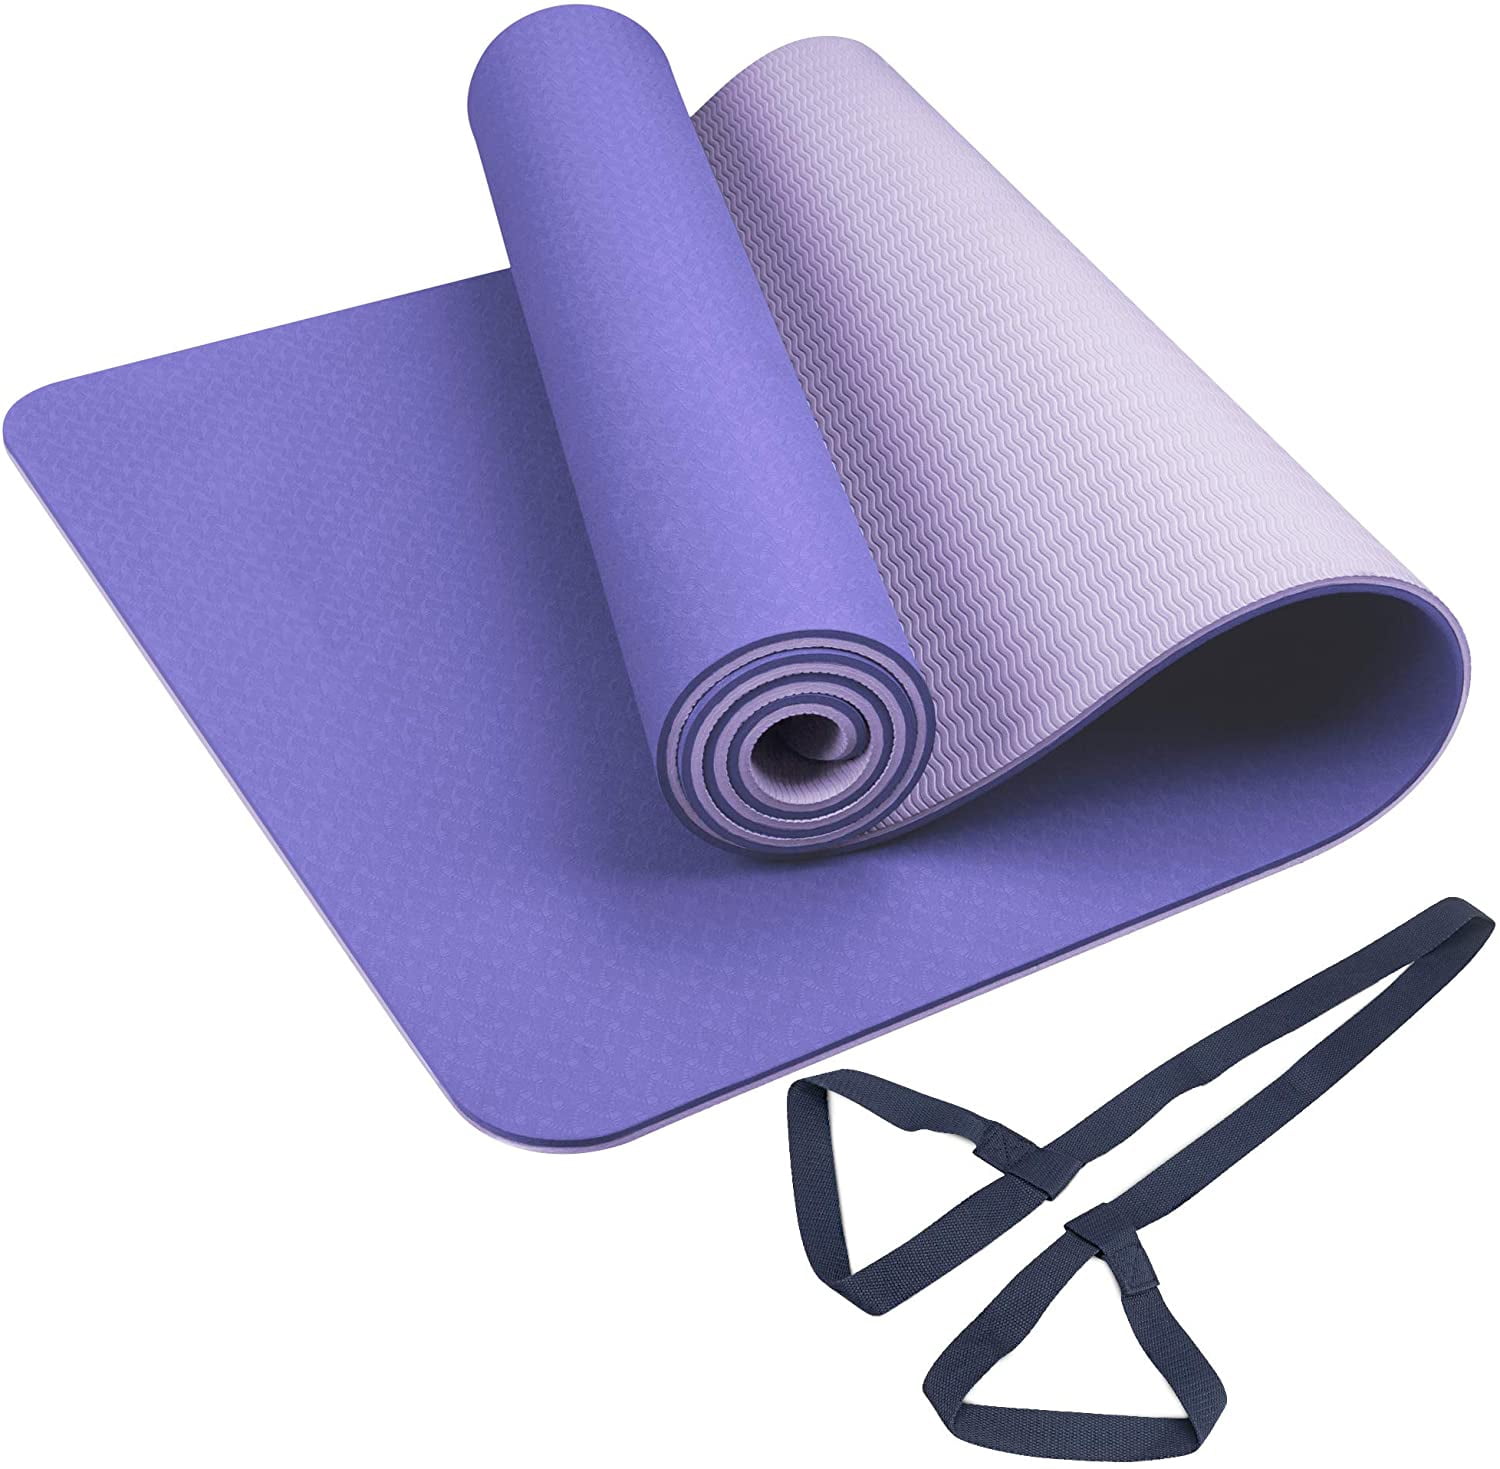 1/3 Inch (8mm) Extra Thick Exercise Workout Yoga Mat with Carrying